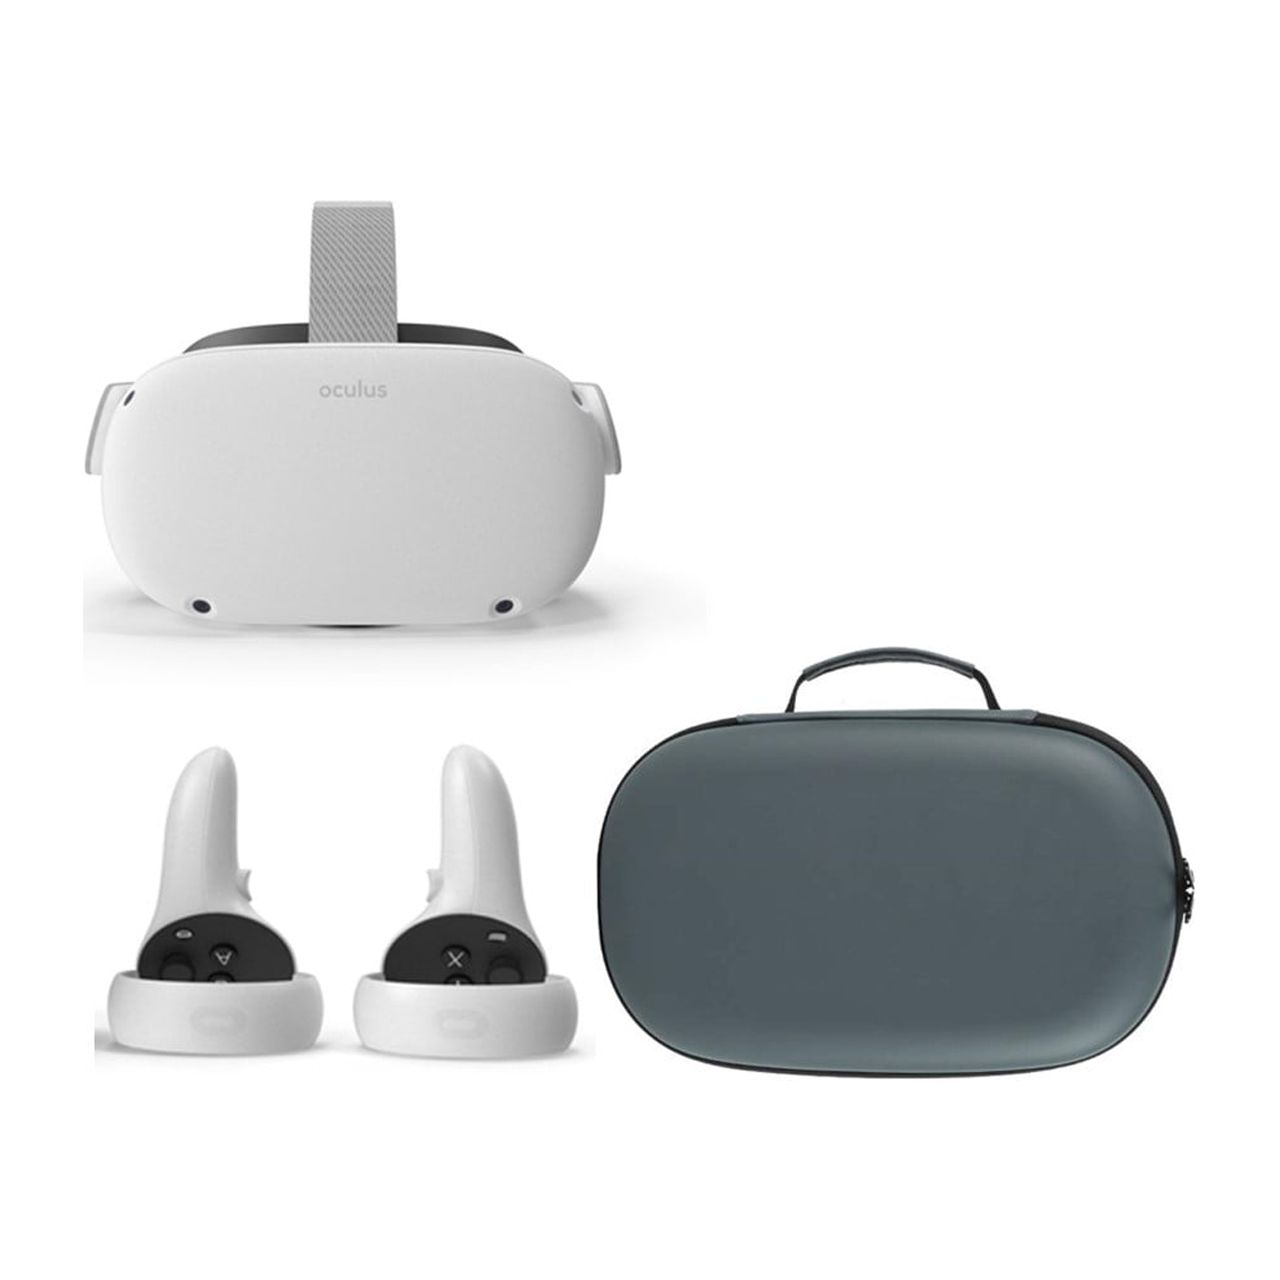 2021 Oculus Quest 2 All-In-One VR Headset, Touch Controllers, 128GB SSD, 1832x1920 up to 90 Hz Refresh Rate LCD, Glasses Compatible, 3D Audio, Mytrix Carrying Case - image 1 of 7